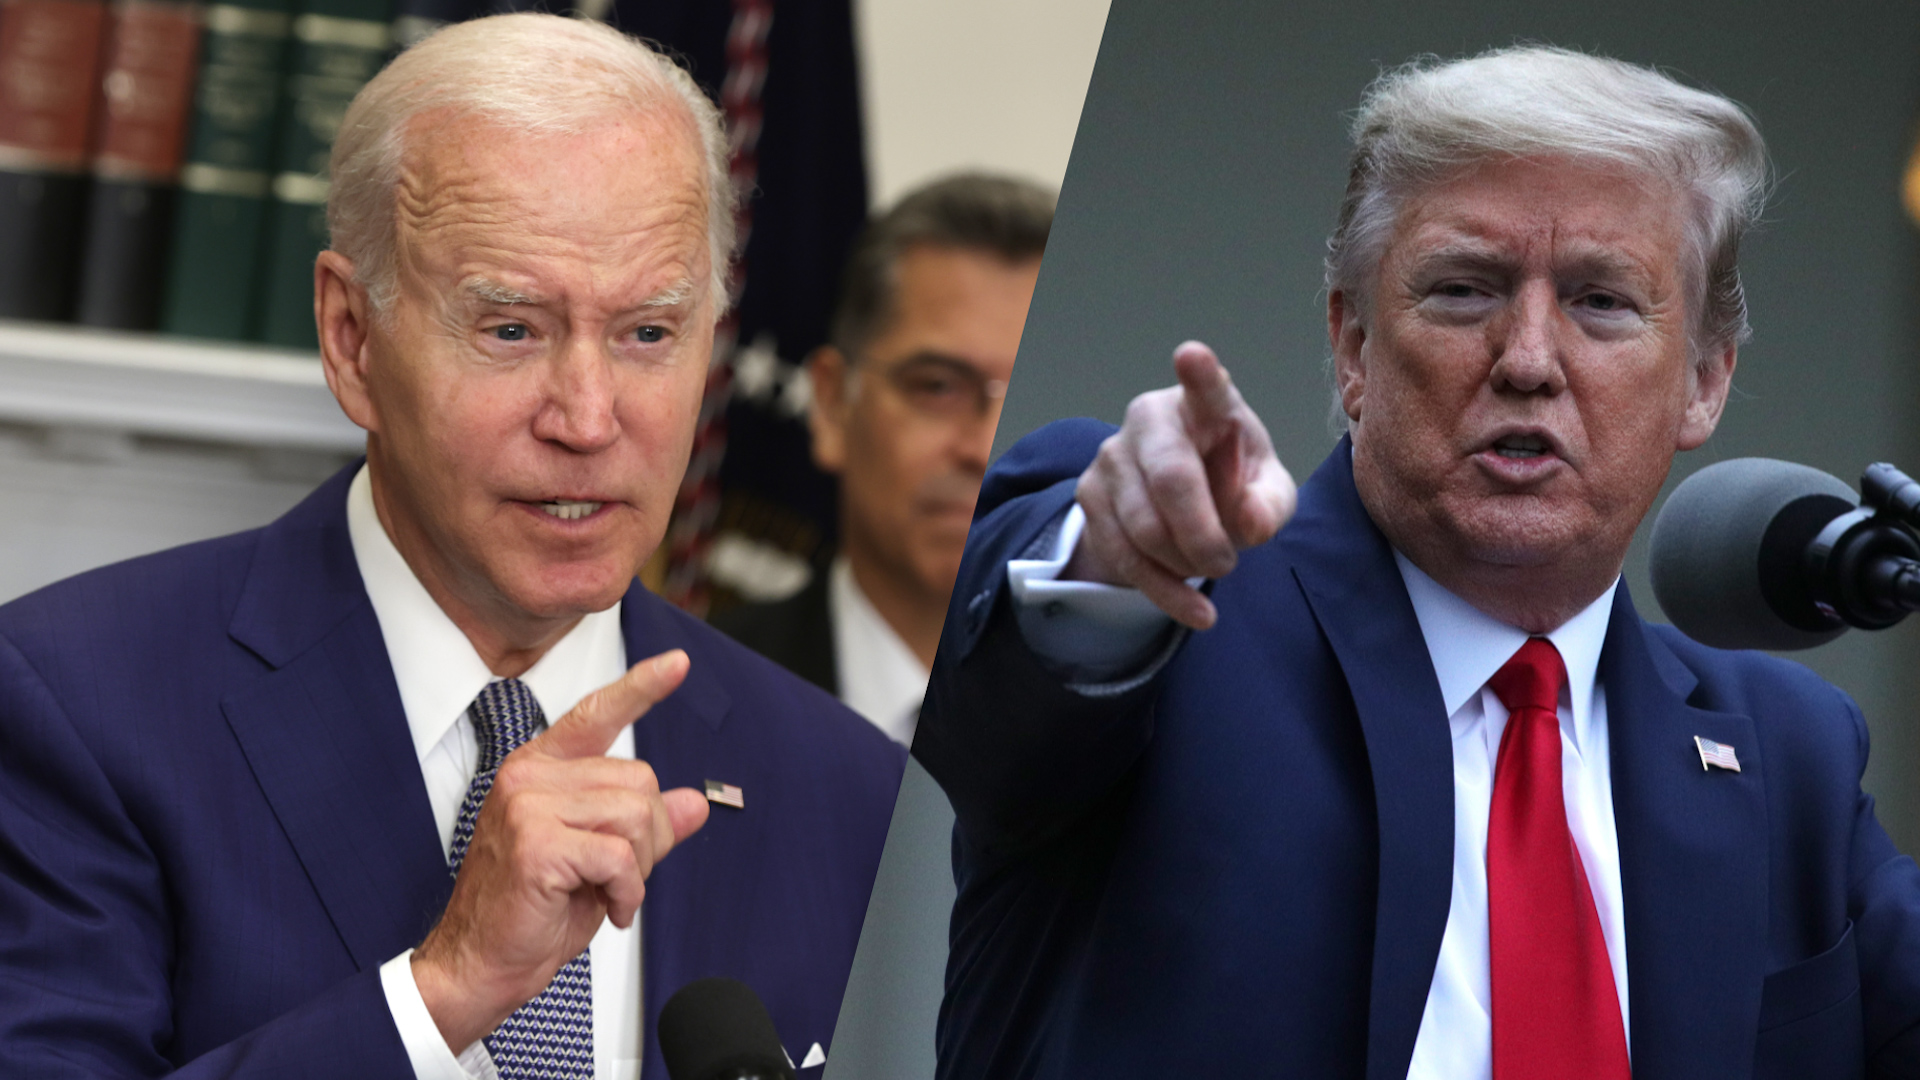 Polling shows presidential candidates Trump and Biden in a tight race, with even Trump's guilty conviction not affecting their standings.